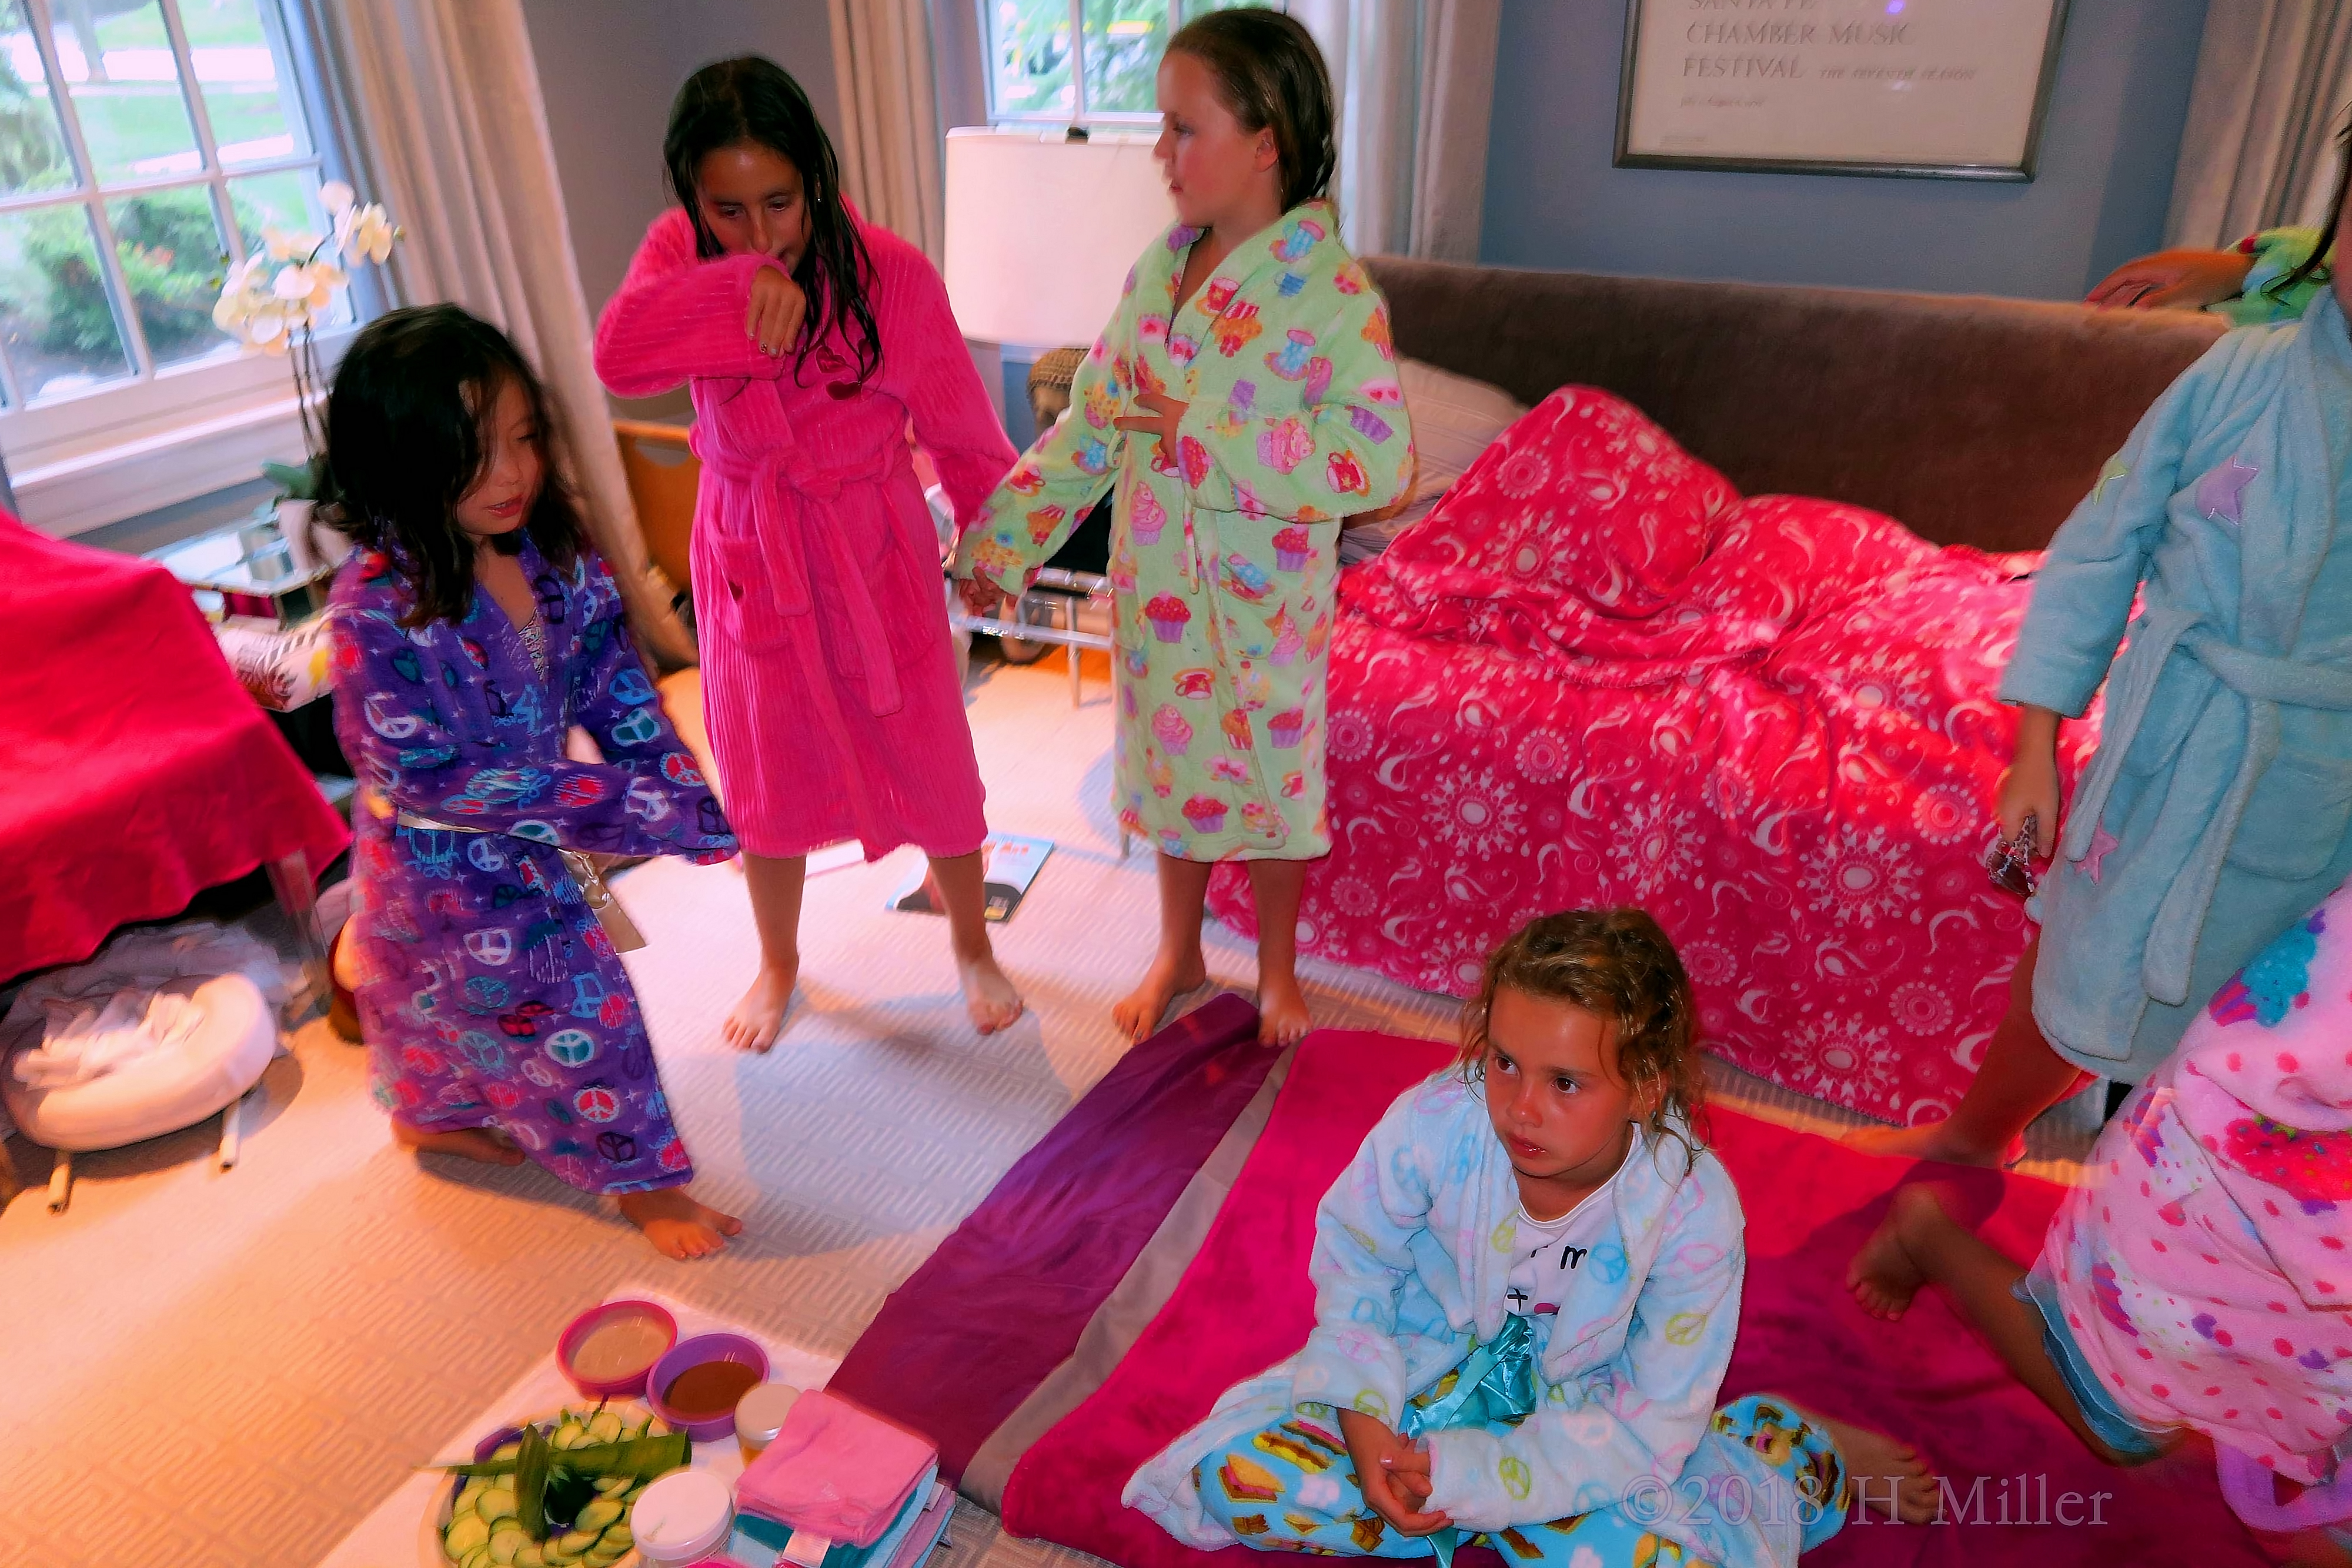 After Putting On Spa Robes, They Are All Set For The Party. 4